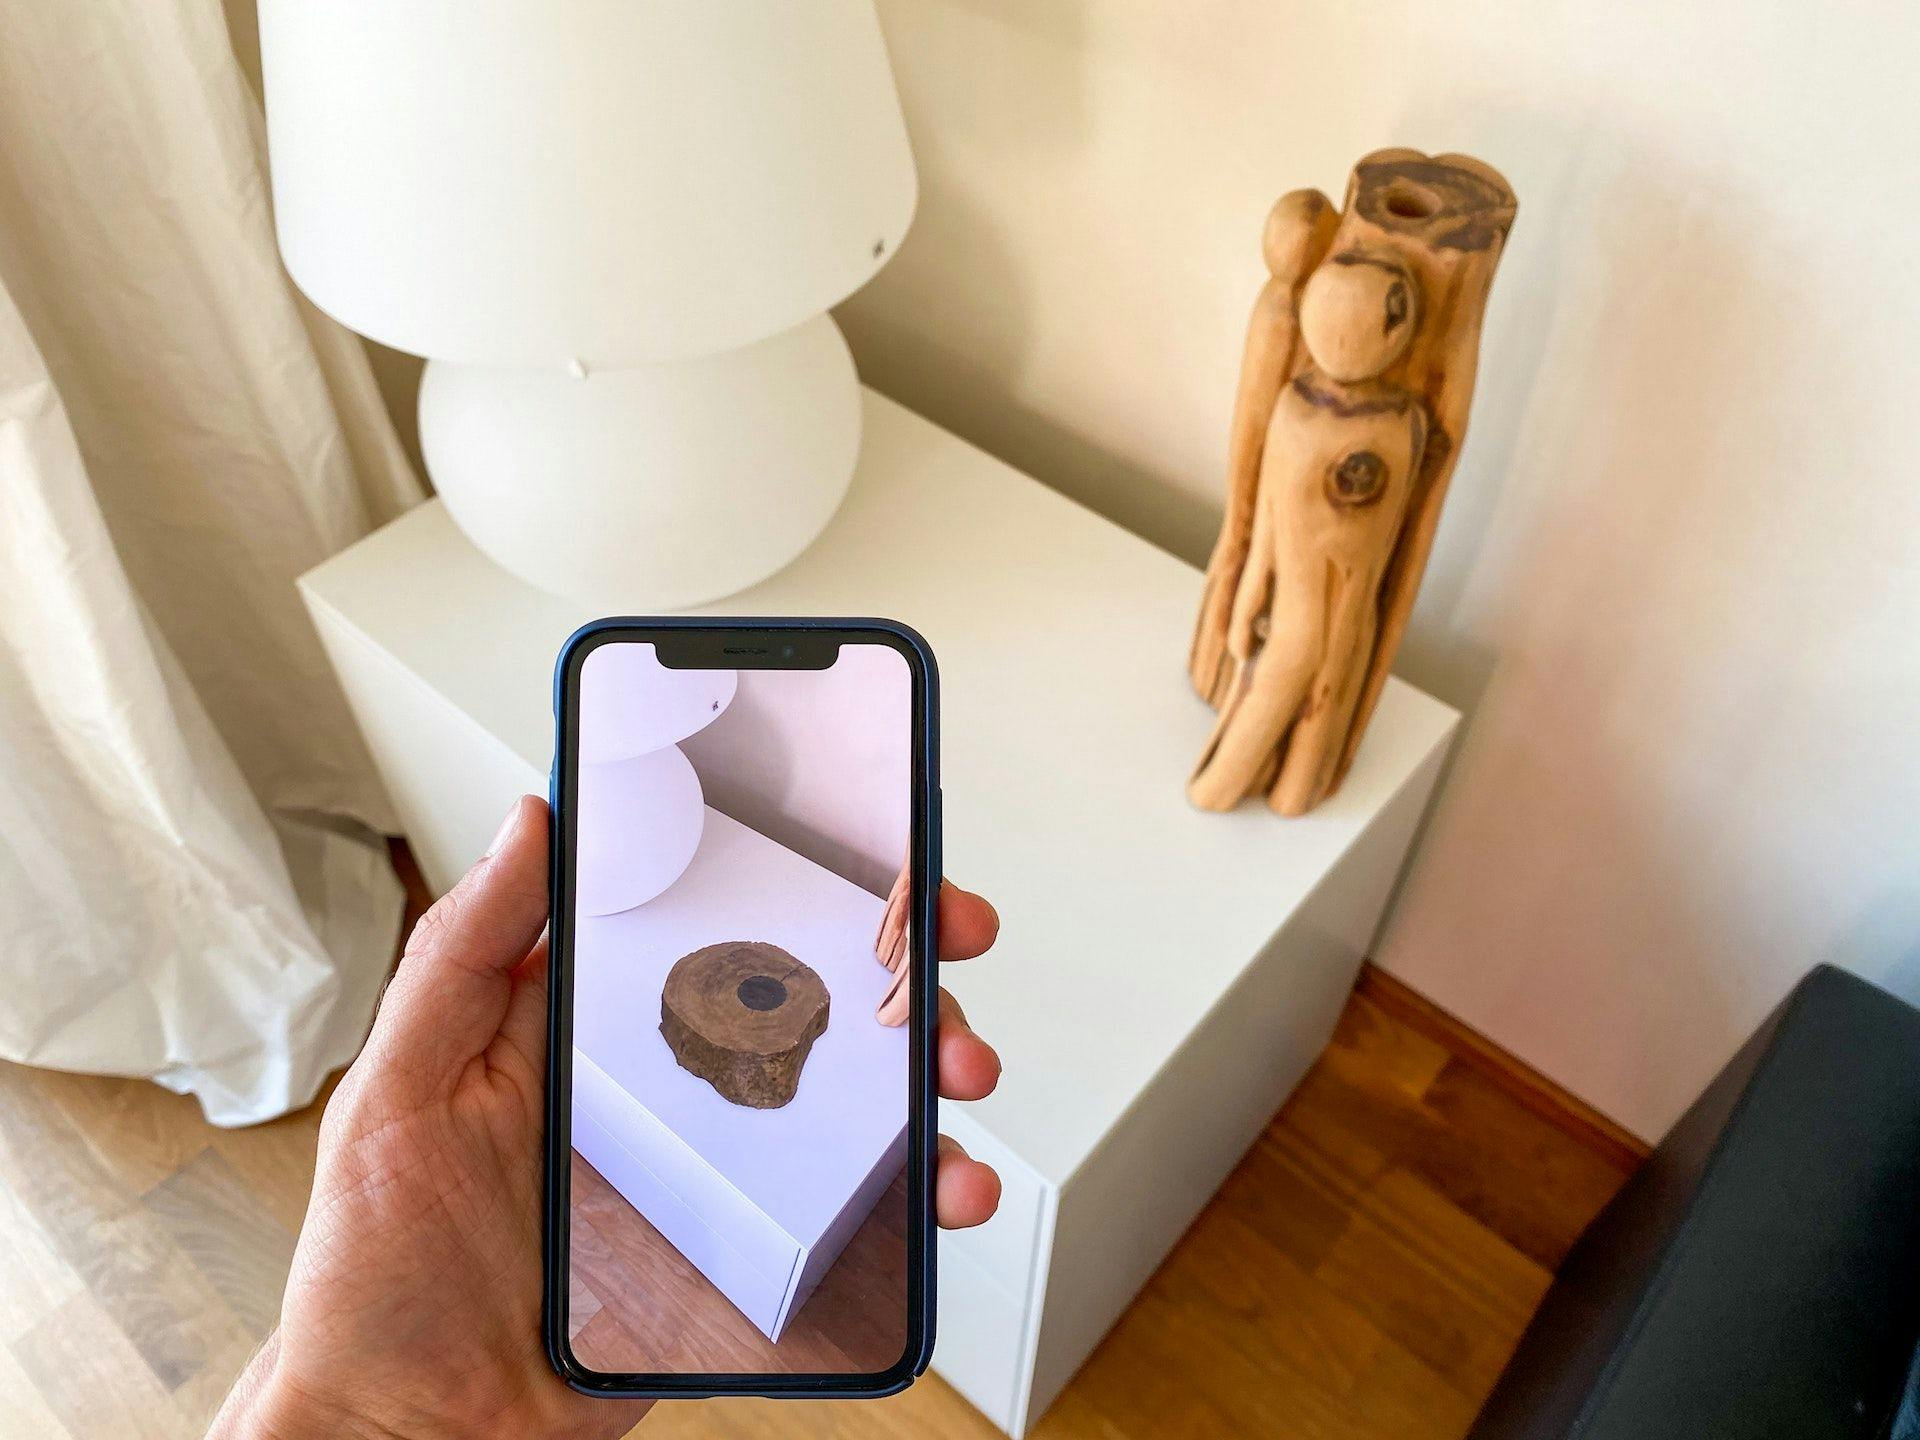 AR app being used on a smartphone